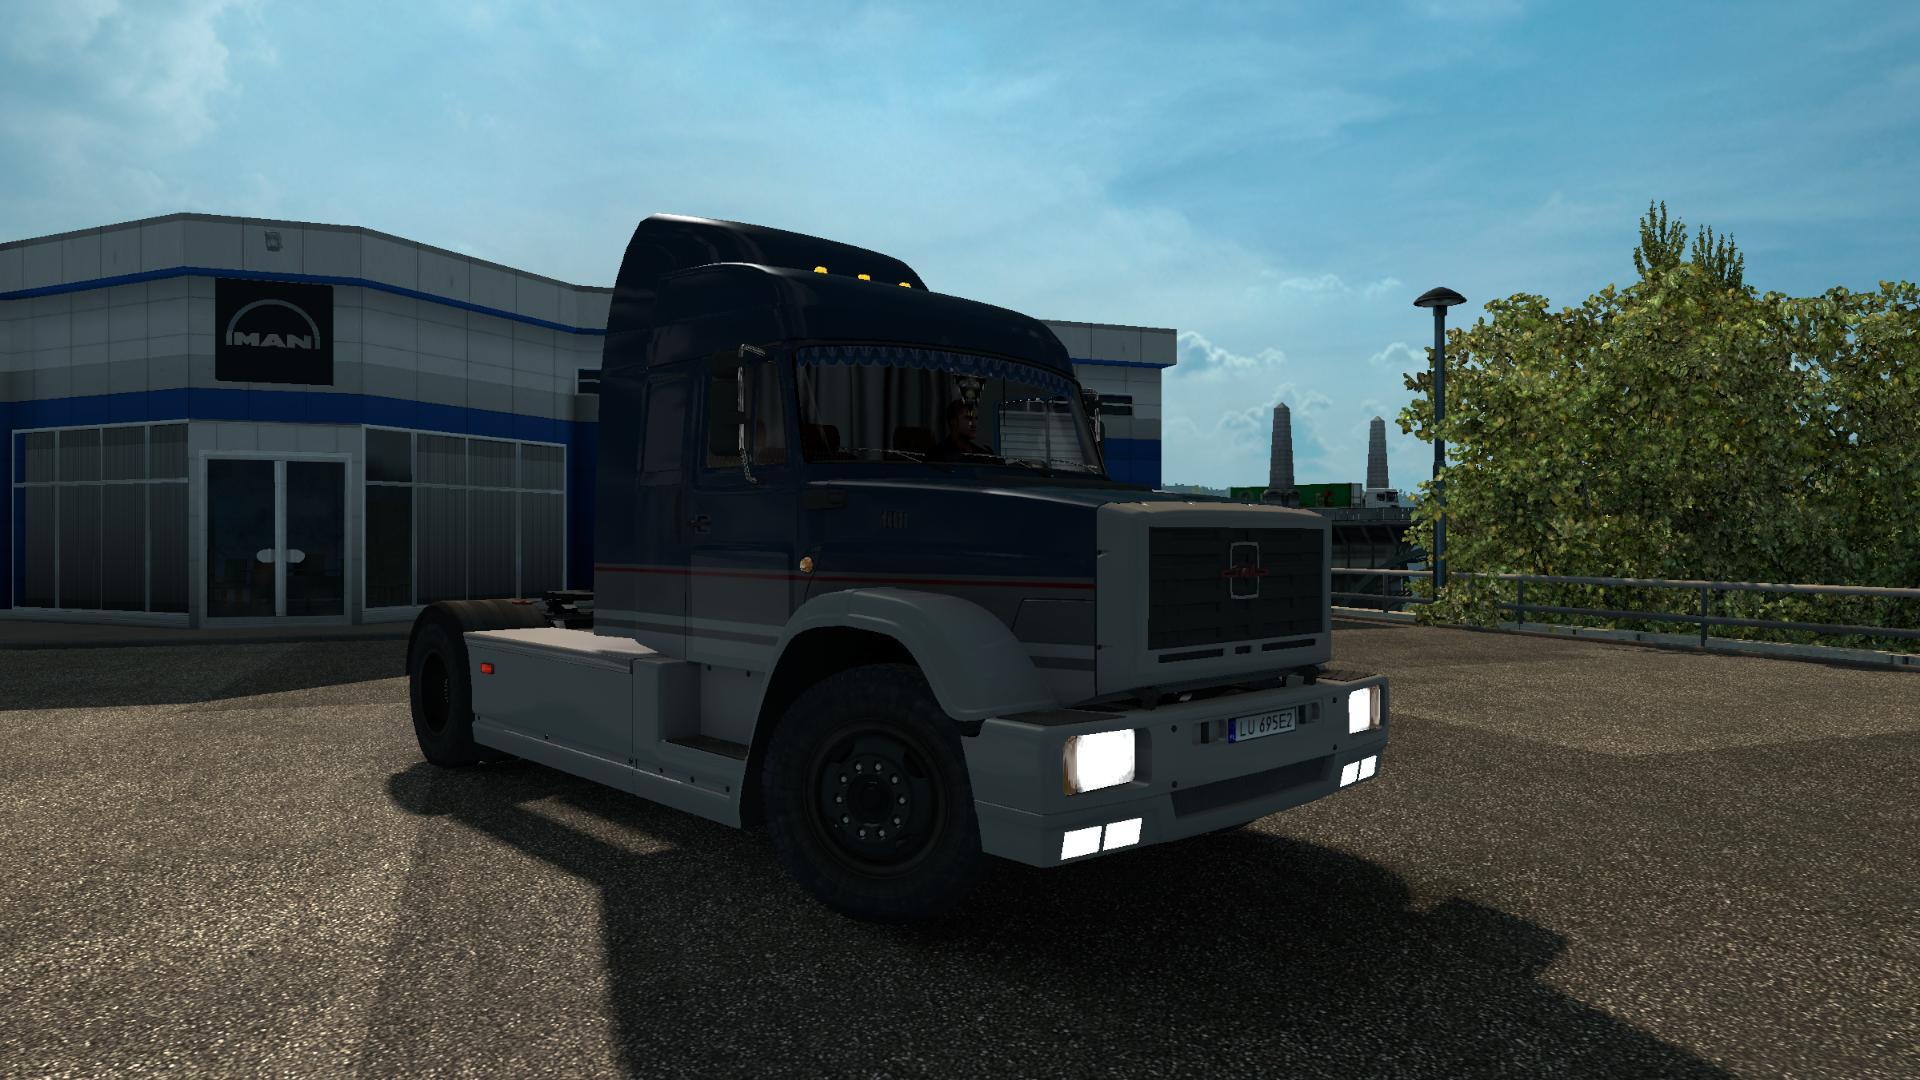 ZIL 5423 MMZ for 1.25.x - 1.23.x